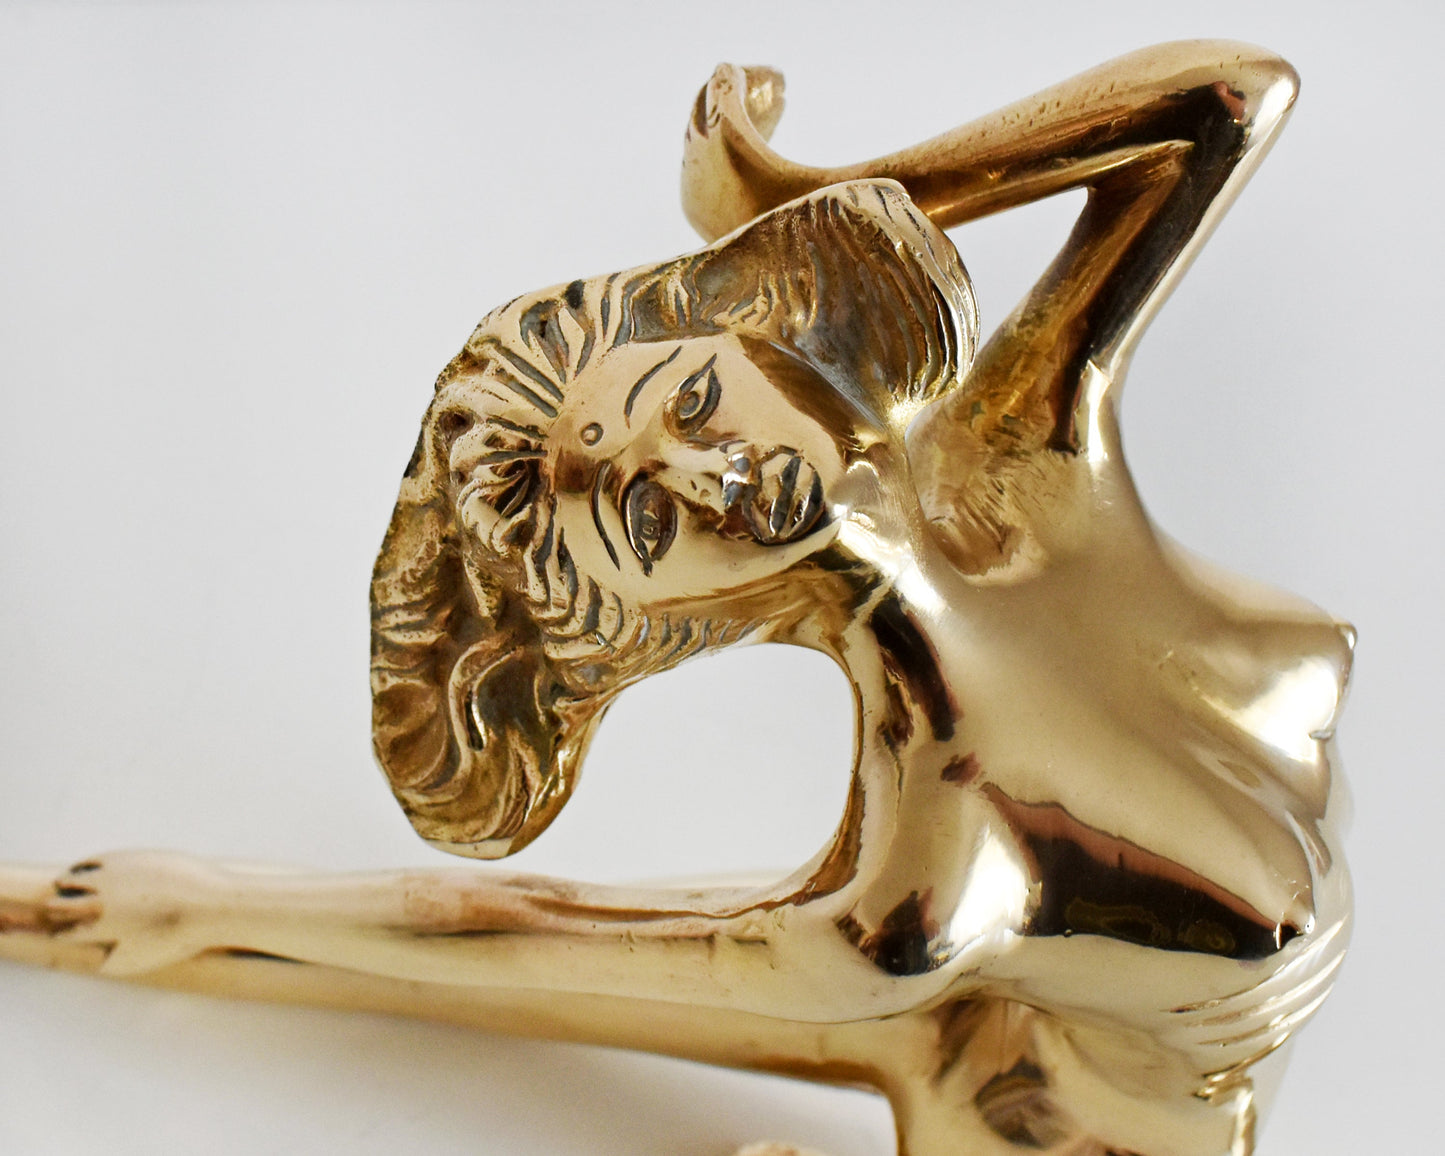 close up of the face of the brass nude woman